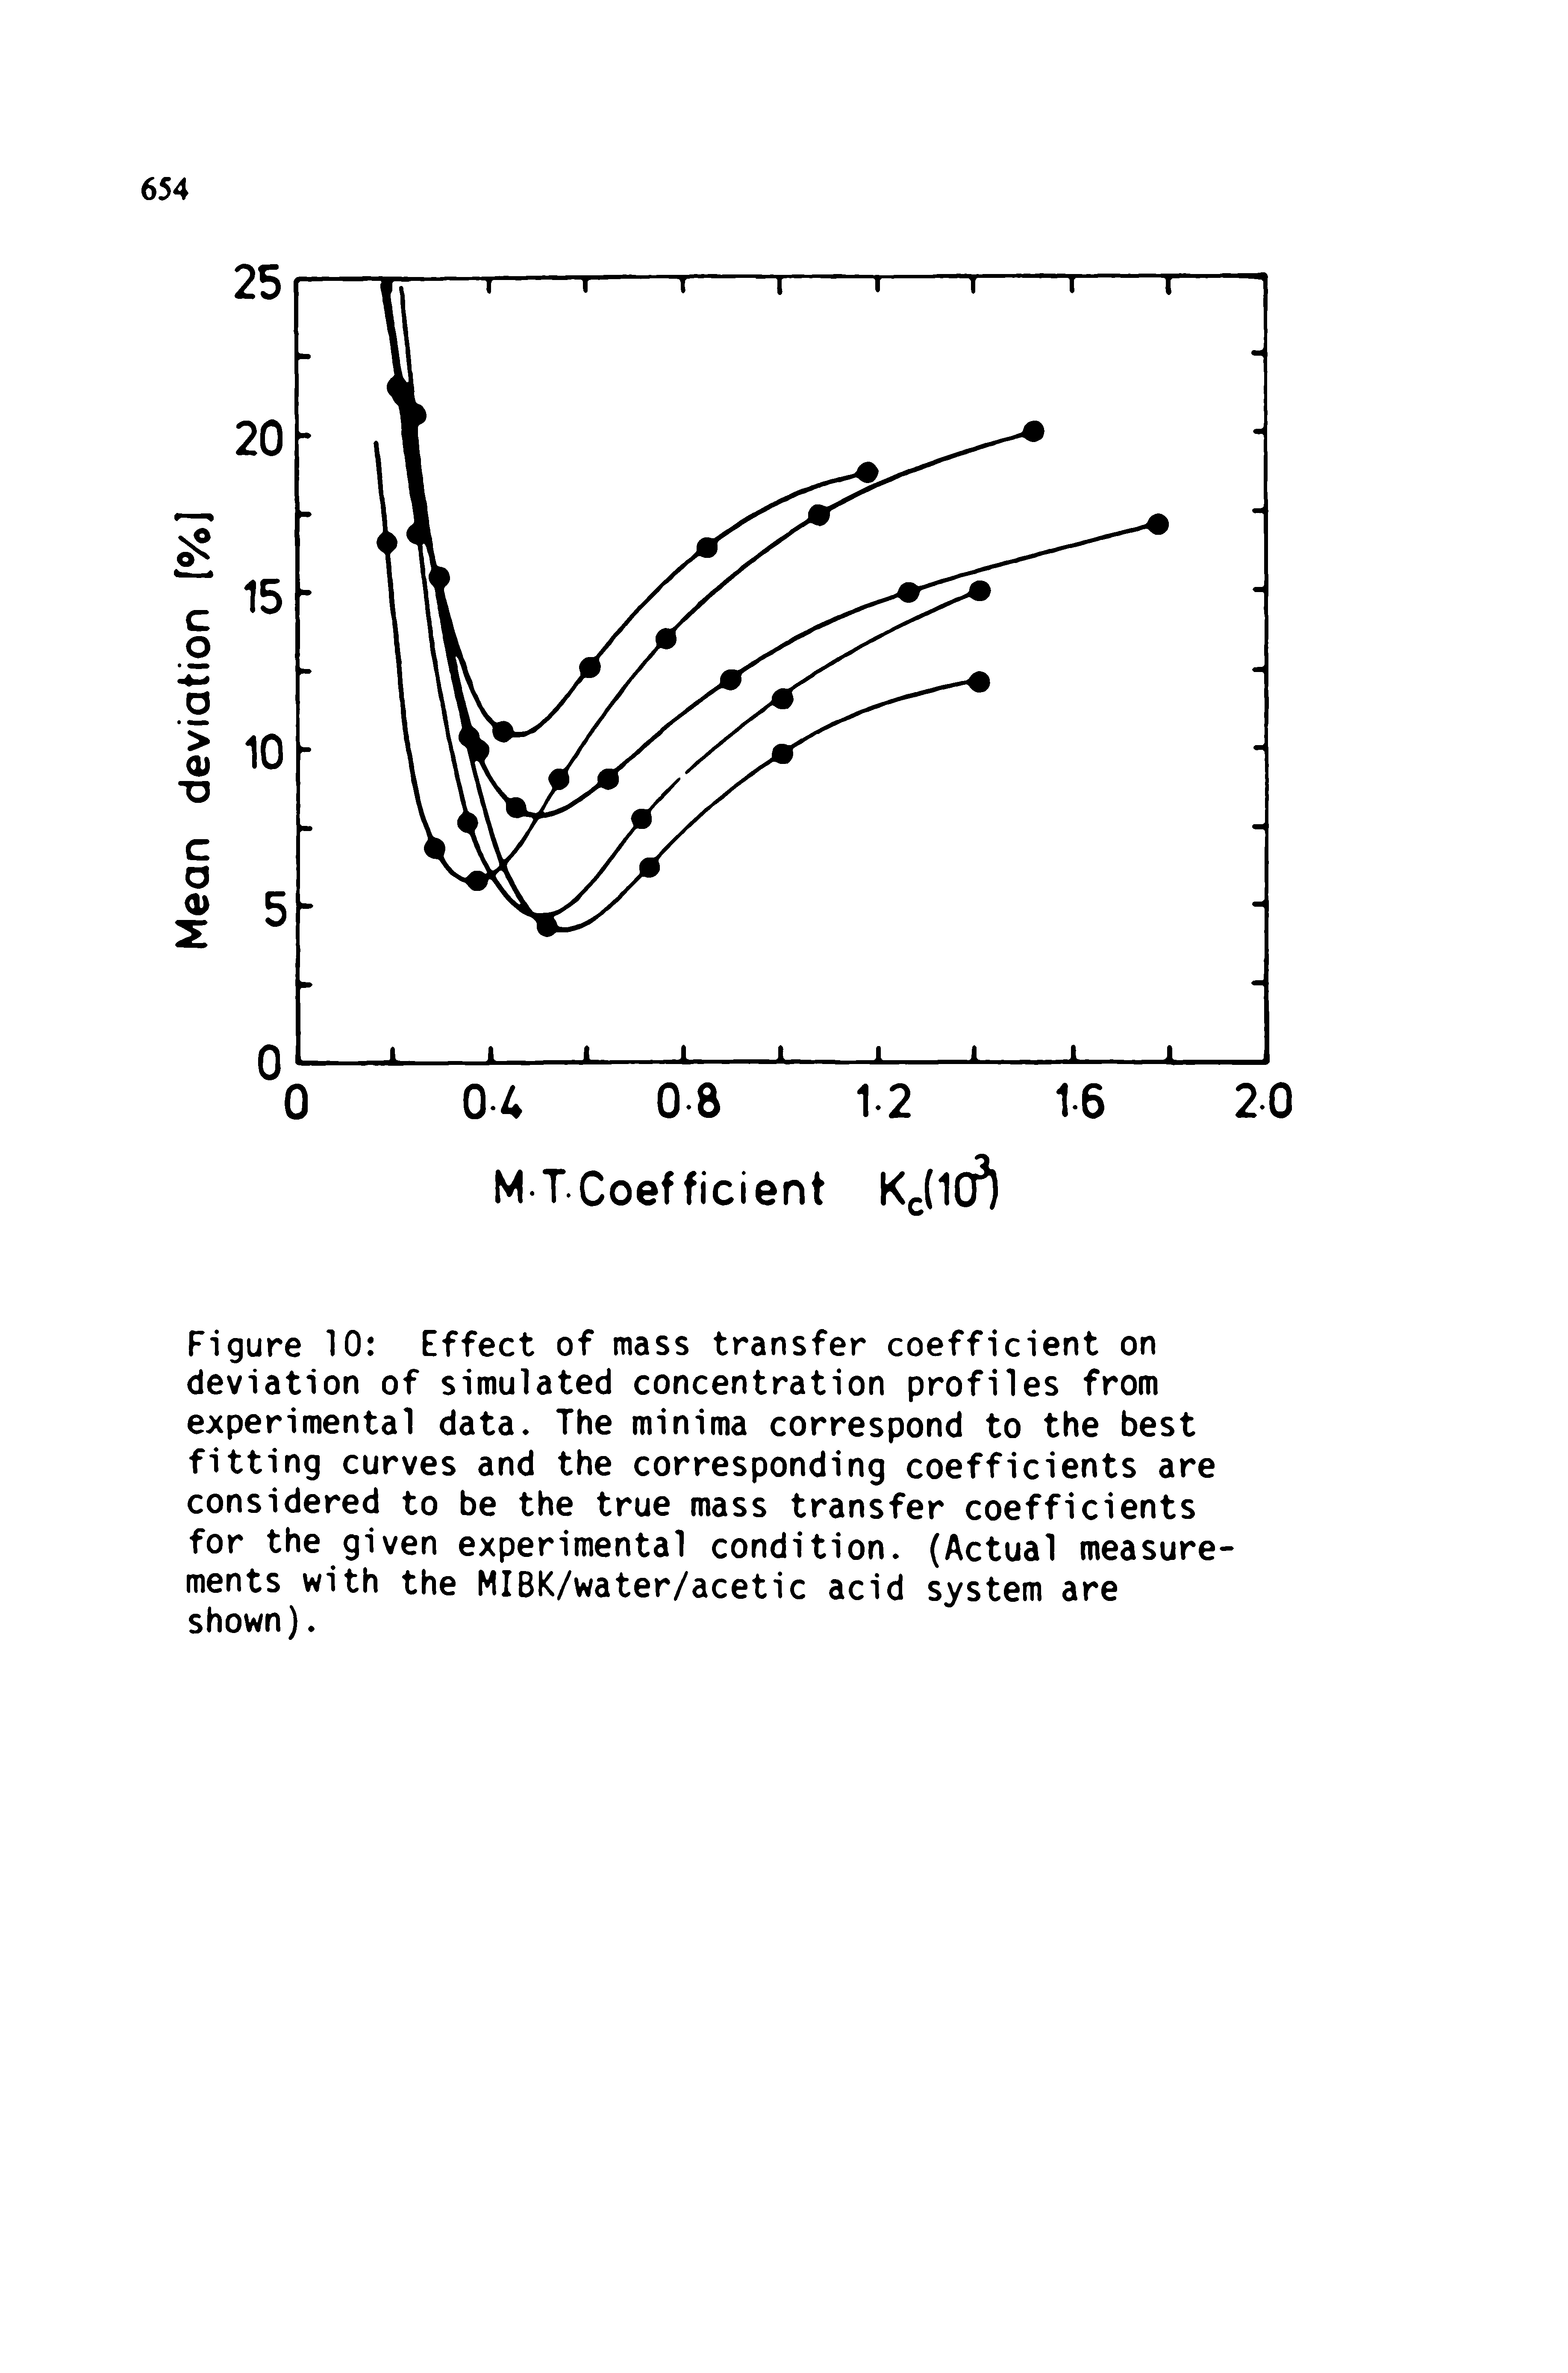 Figure 10 Effect of mass transfer coefficient on deviation of simulated concentration profiles from experimental data. The minima correspond to the best fitting curves and the corresponding coefficients are considered to be the true mass transfer coefficients for the given experimental condition. (Actual measurements with the MIBK/water/acetic acid system are shown).